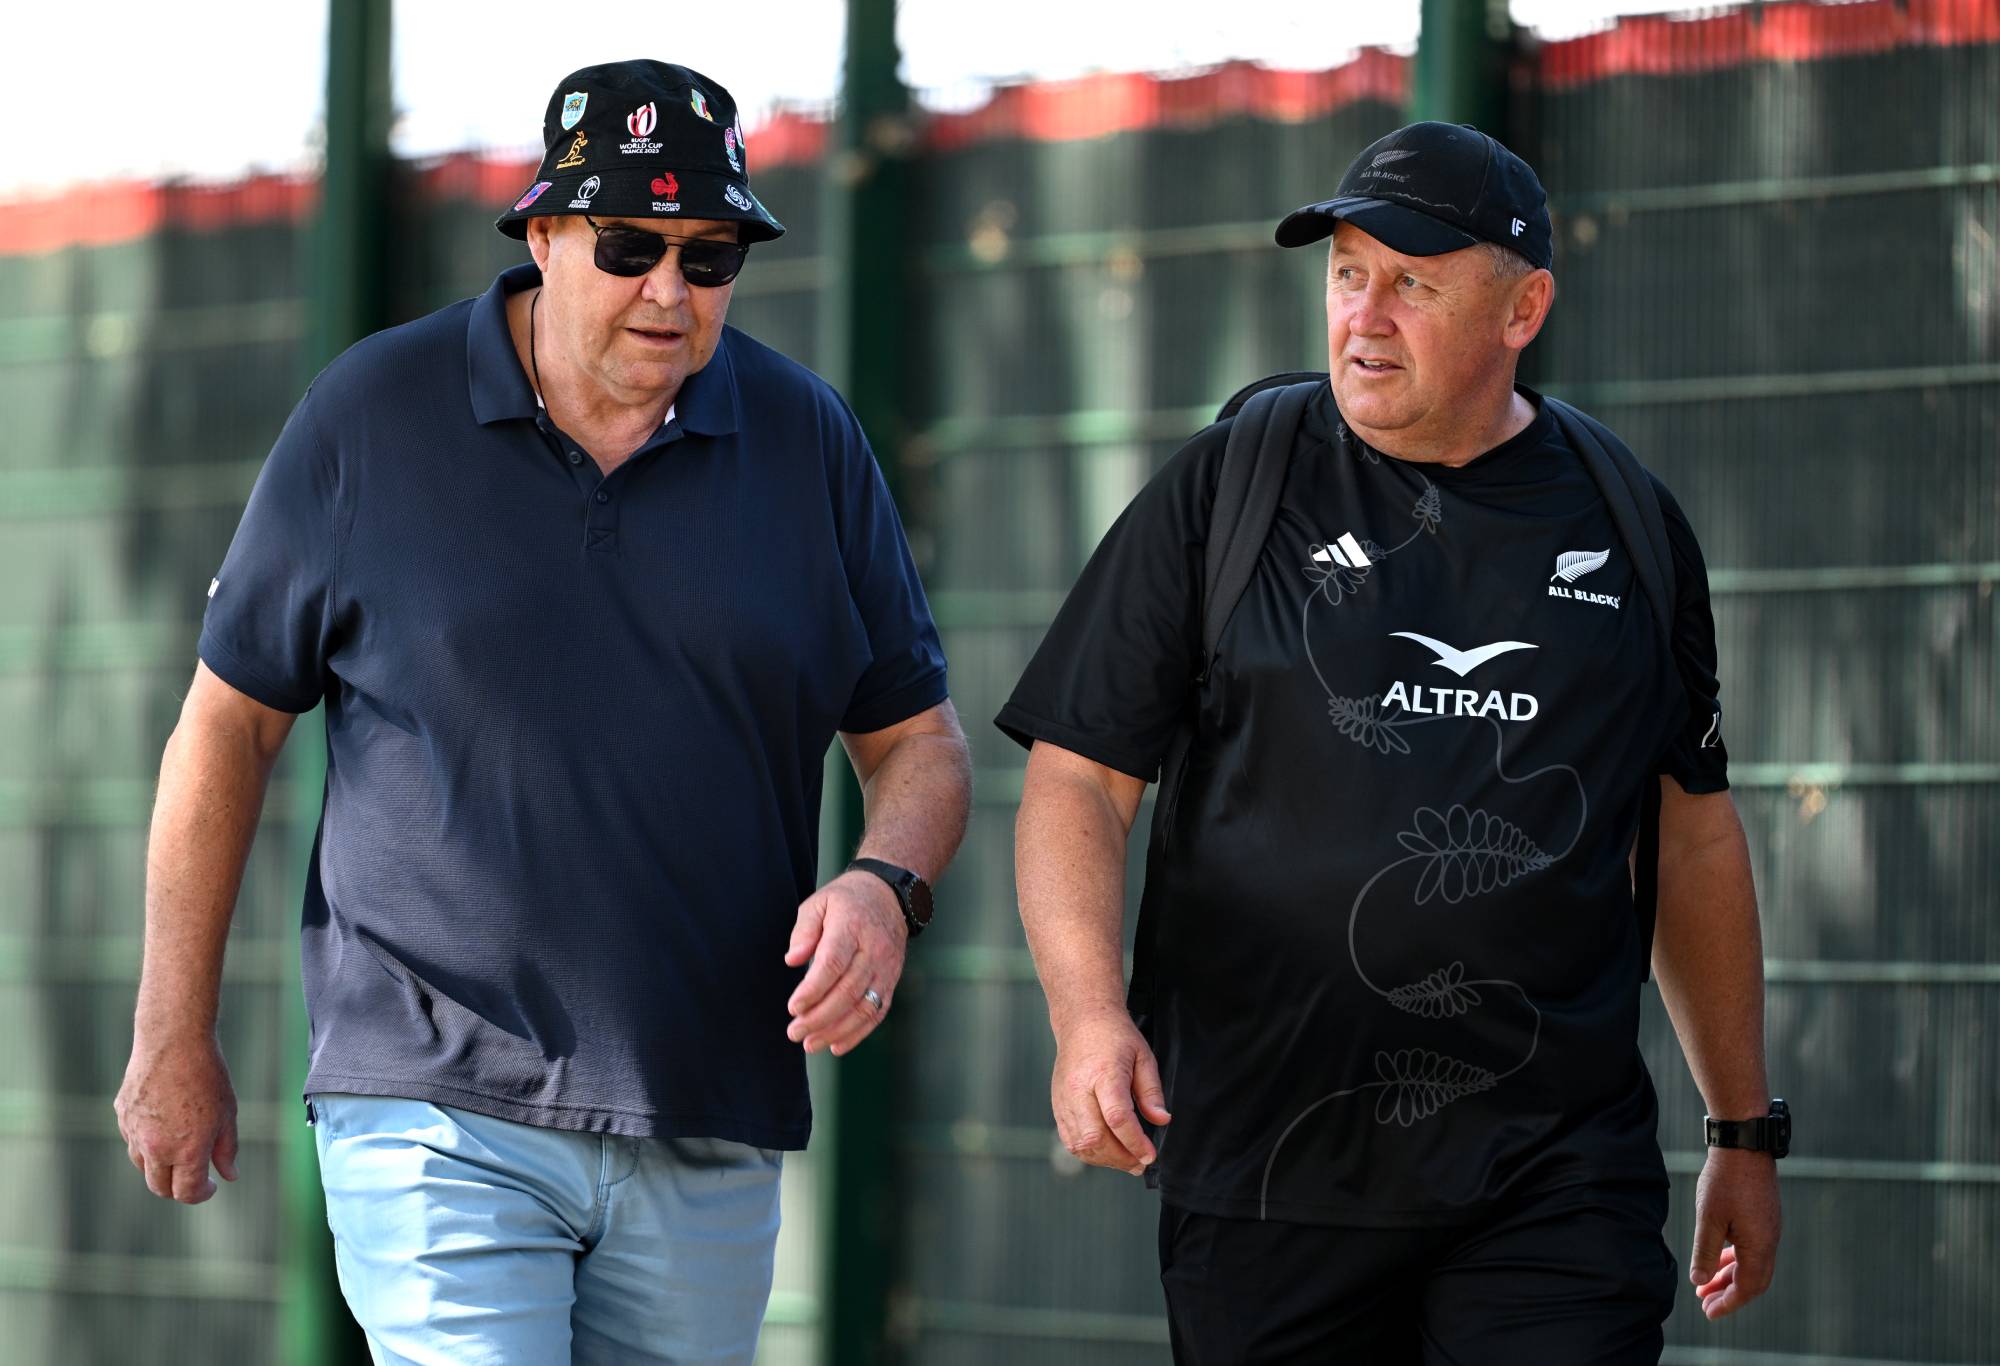 Former All Blacks head coach Sir Steve Hansen walks with head coach Ian Foster of the All Blacks following a New Zealand All Blacks training session at LOU rugby club ahead of their Rugby World Cup France 2023 match against Namibia on September 11, 2023 in Lyon, France. (Photo by Hannah Peters/Getty Images)